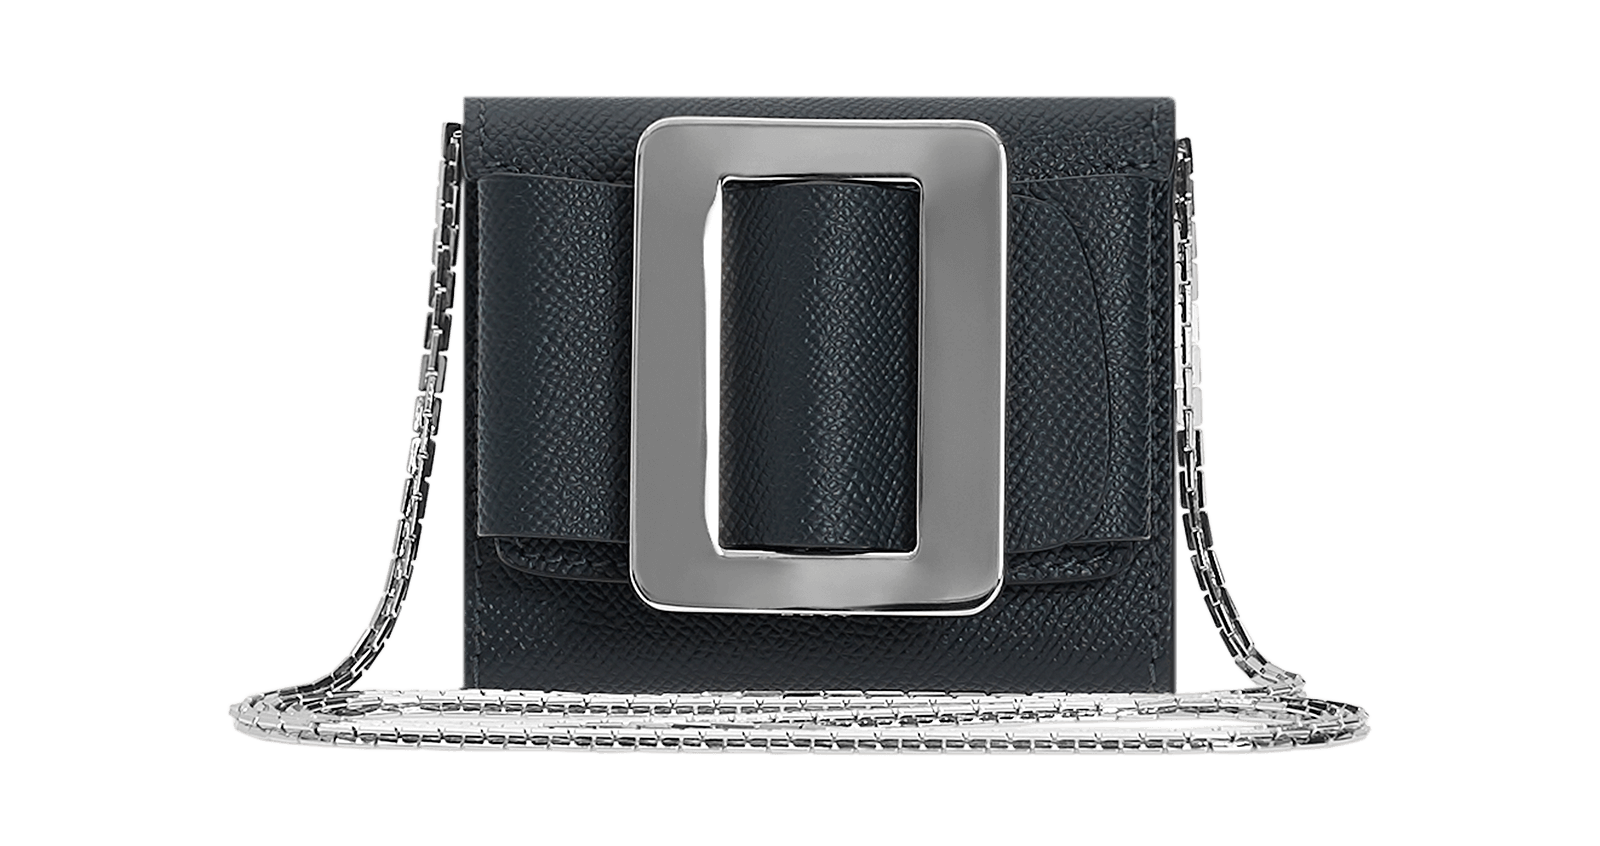 Square coin purse in grained blue leather with oversized silver buckle, front flap closure, and metal chain carrying strap.